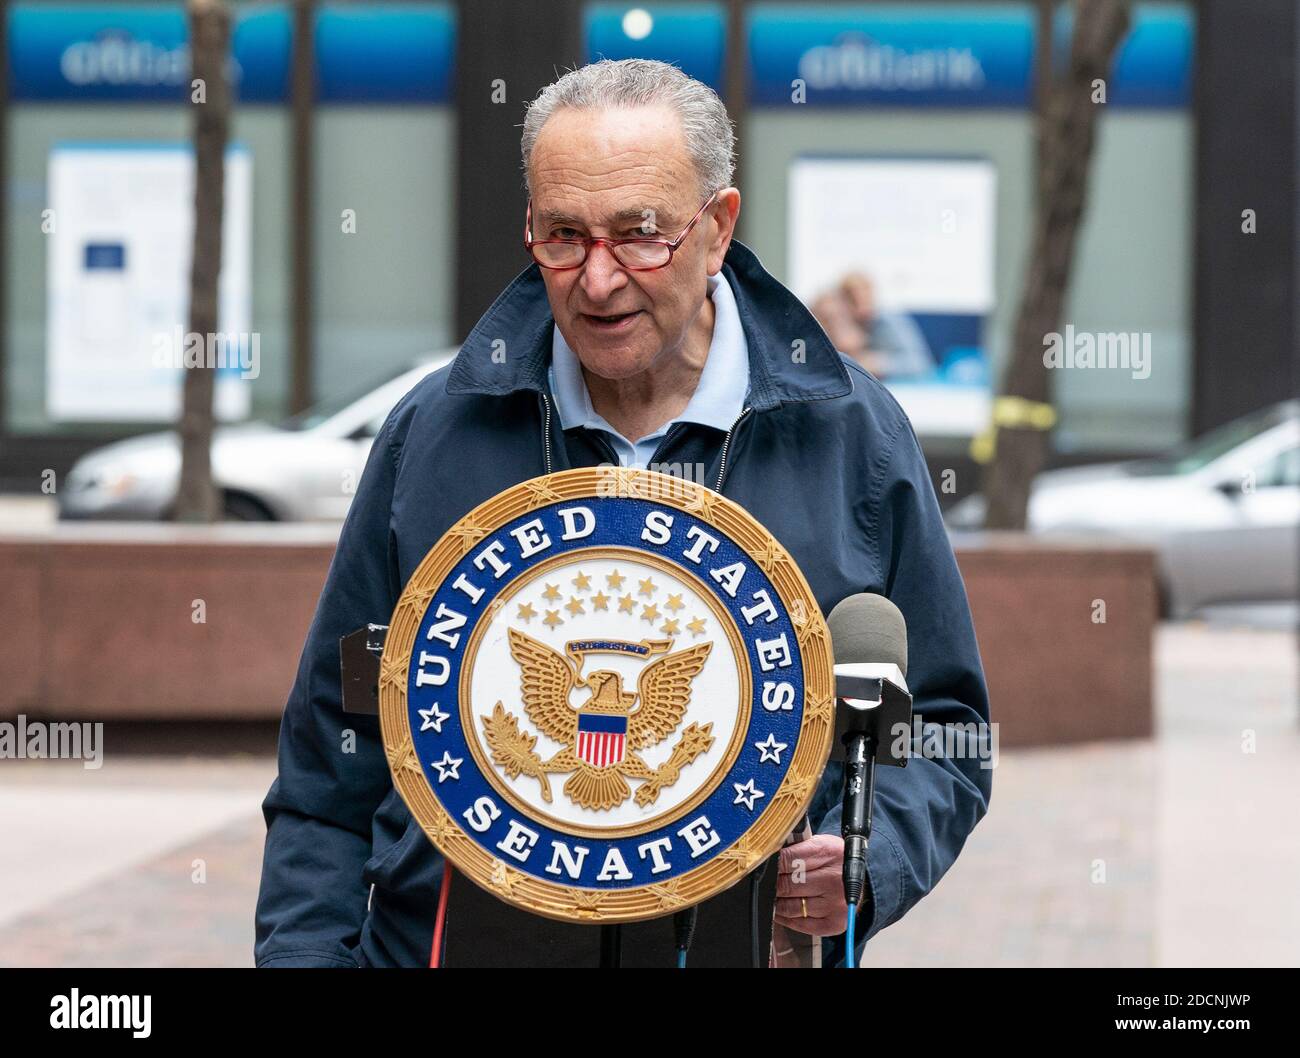 New York, United States. 22nd Nov, 2020. U. S. Senator Chuck Schumer speaks during media briefing on COVID-19 and Navy Grumman Plume. Senator spoke of Navy to contain the Grumman Plume. Schumer asked President-elect transition team to oversee the U. S. Navy to clean up the plume. The Grumman Plume owned by U. S. Navy and Northrop Grumman was contaminated with toxic chemicals since mid 1970th at Bethpage facility sites in Long Island. (Photo by Lev Radin/Pacific Press) Credit: Pacific Press Media Production Corp./Alamy Live News Stock Photo